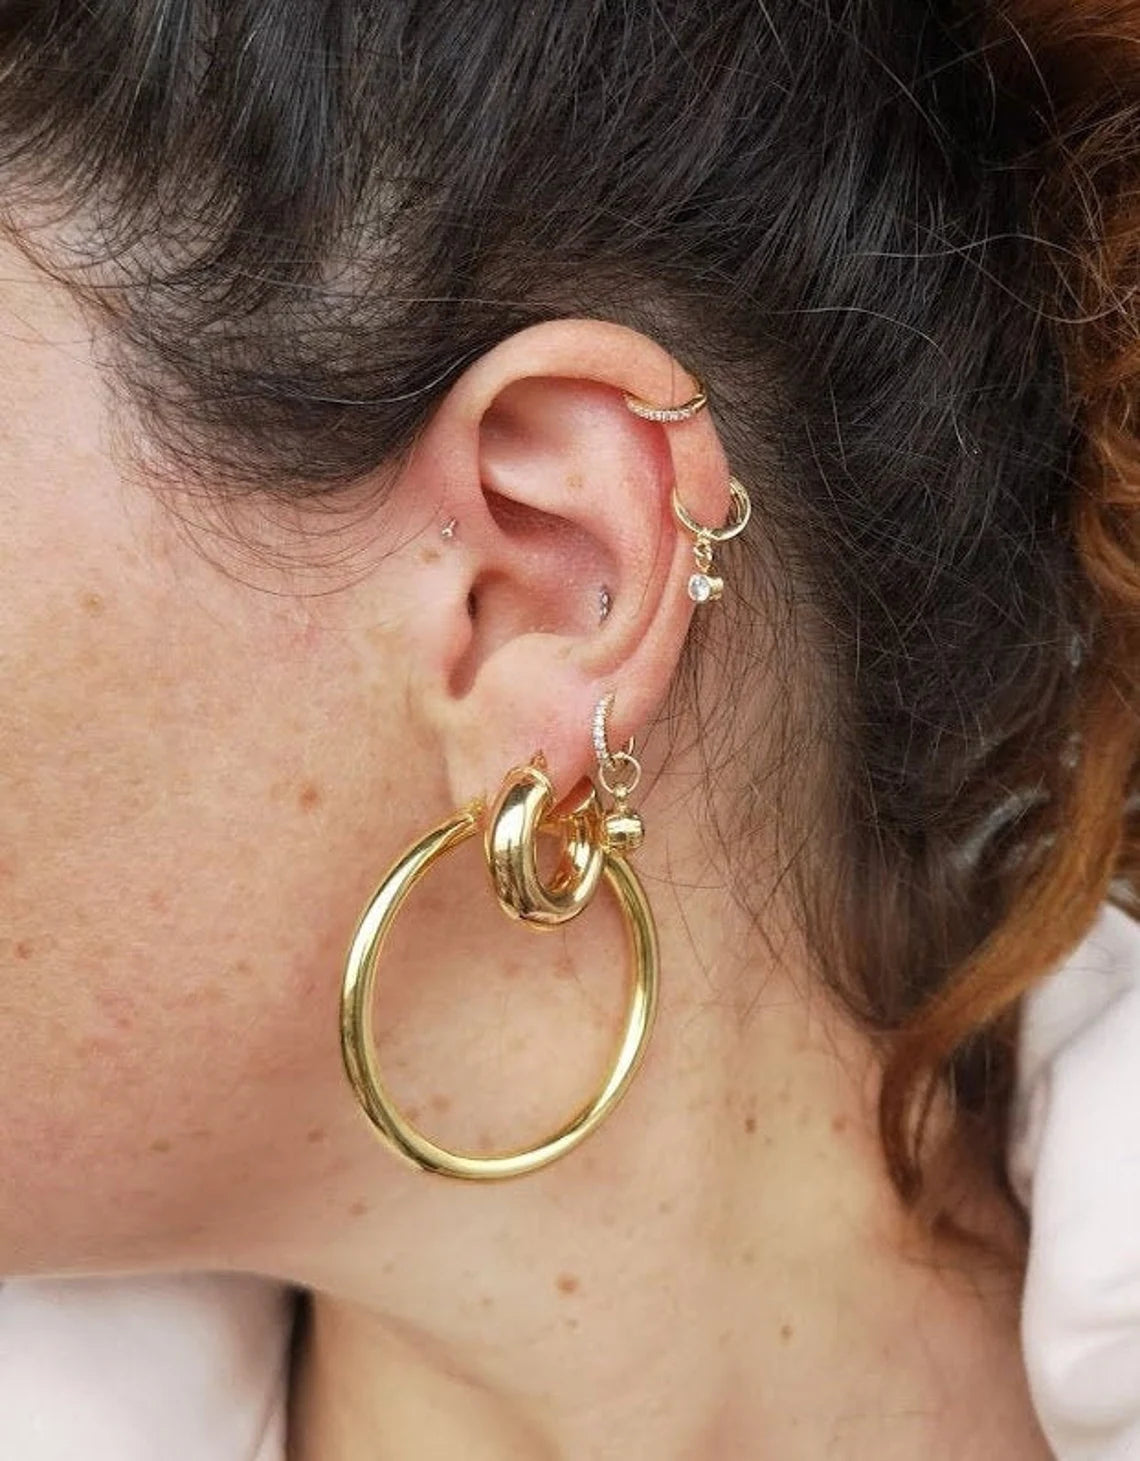 GOLD HOOPS - 50 mm hoops in solid 14K yellow gold